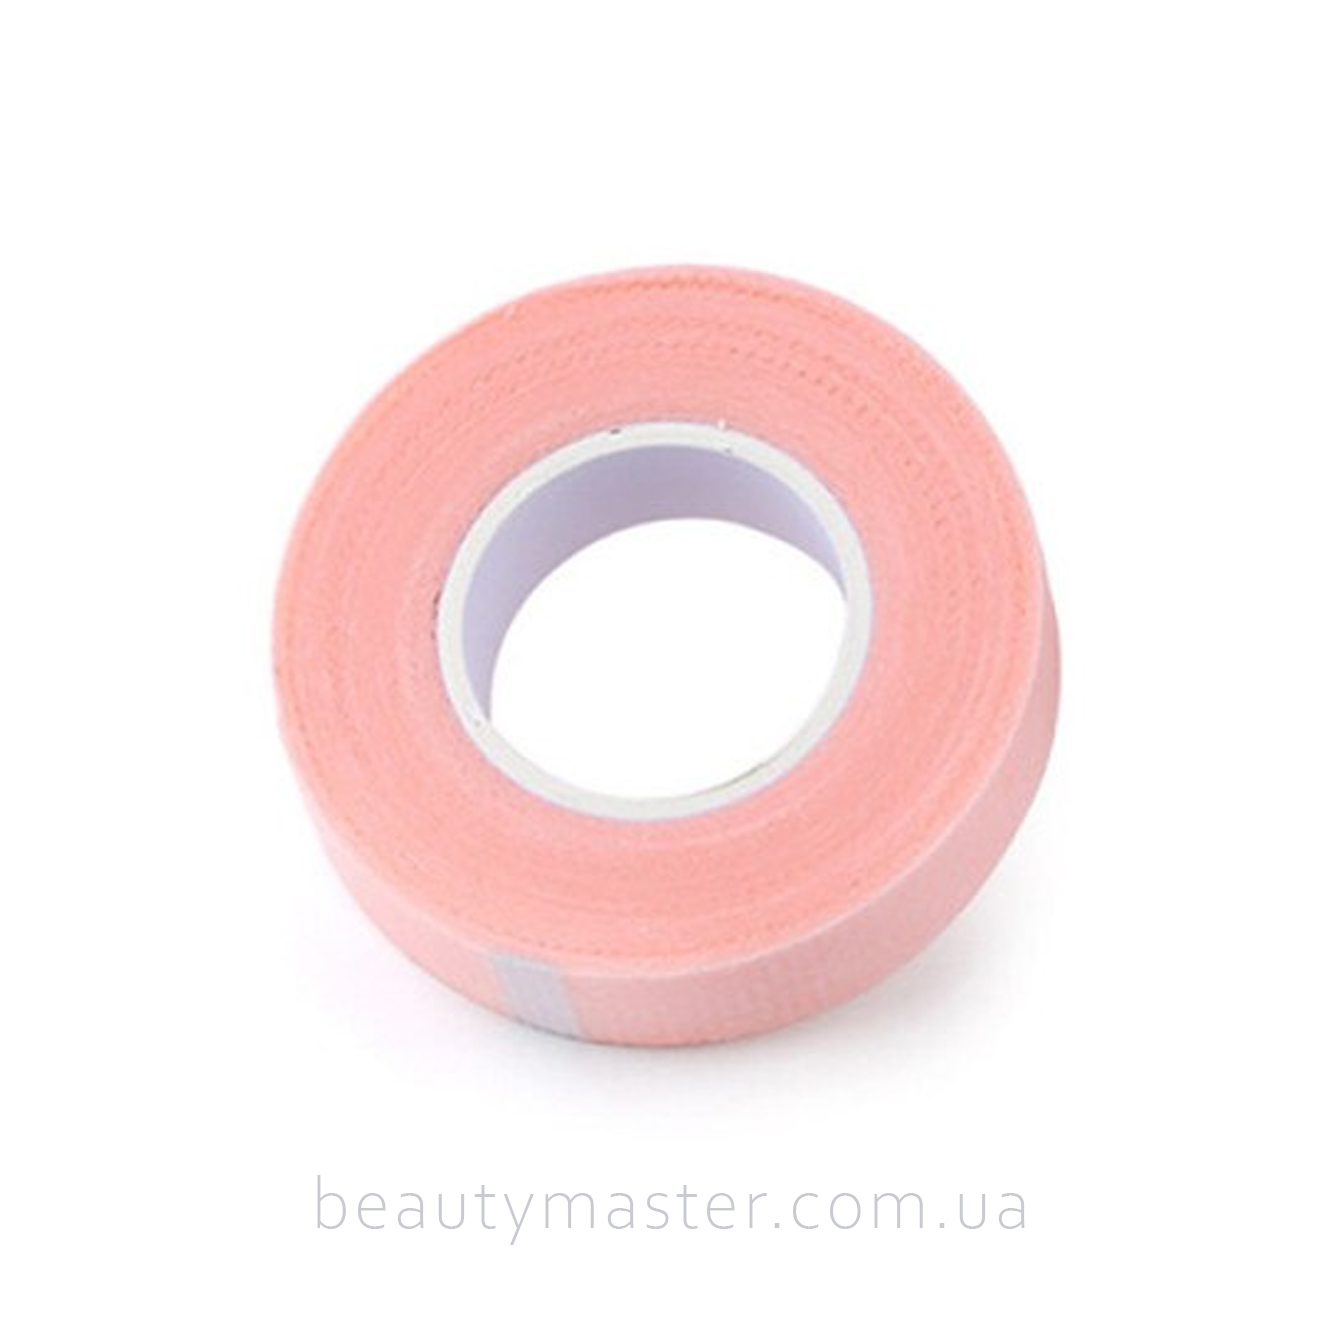 Tape (Scotch) for lower eyelashes in the range of non-woven fabric